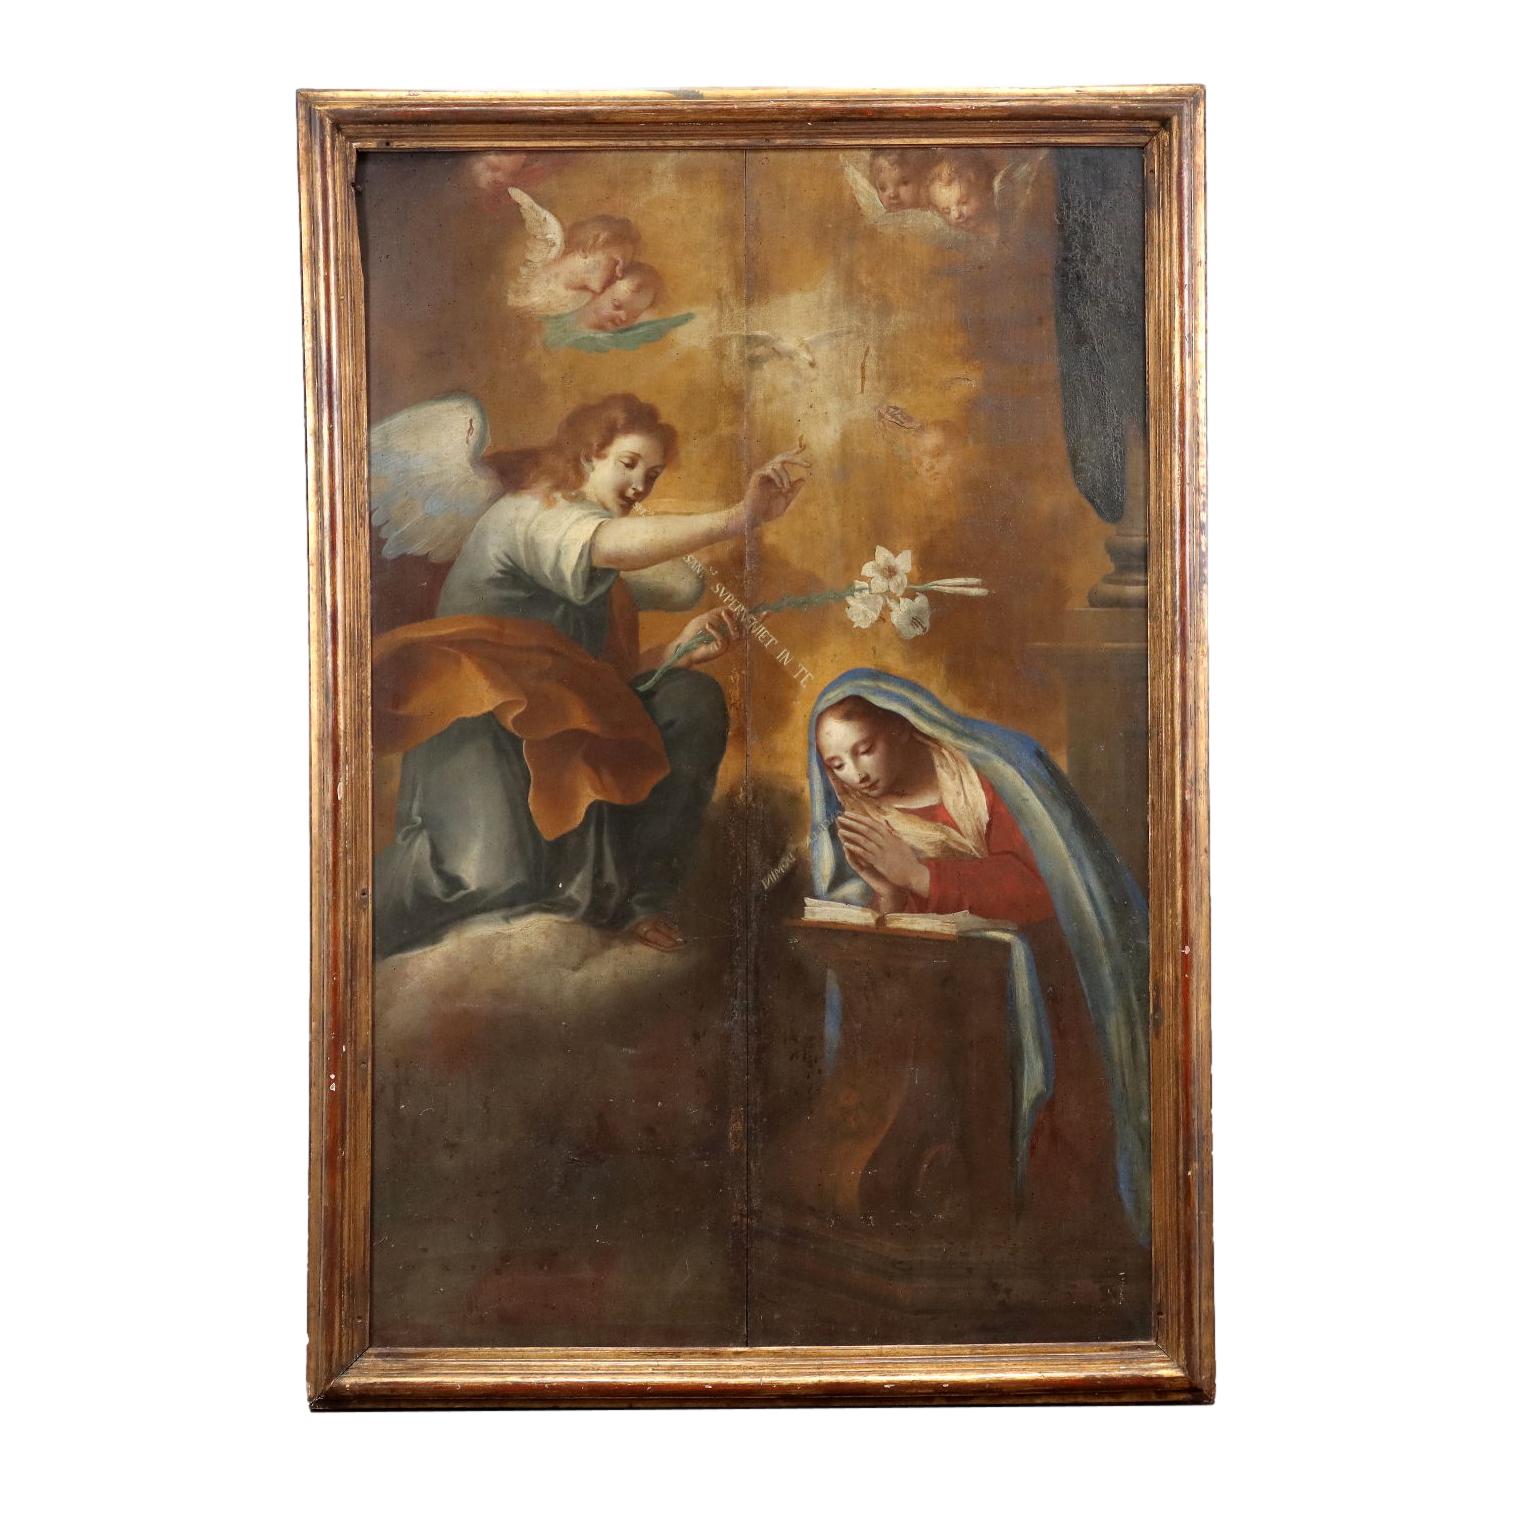 Unknown Figurative Painting - Religious Subject Oil on Wooden Table Italy XVIII Century